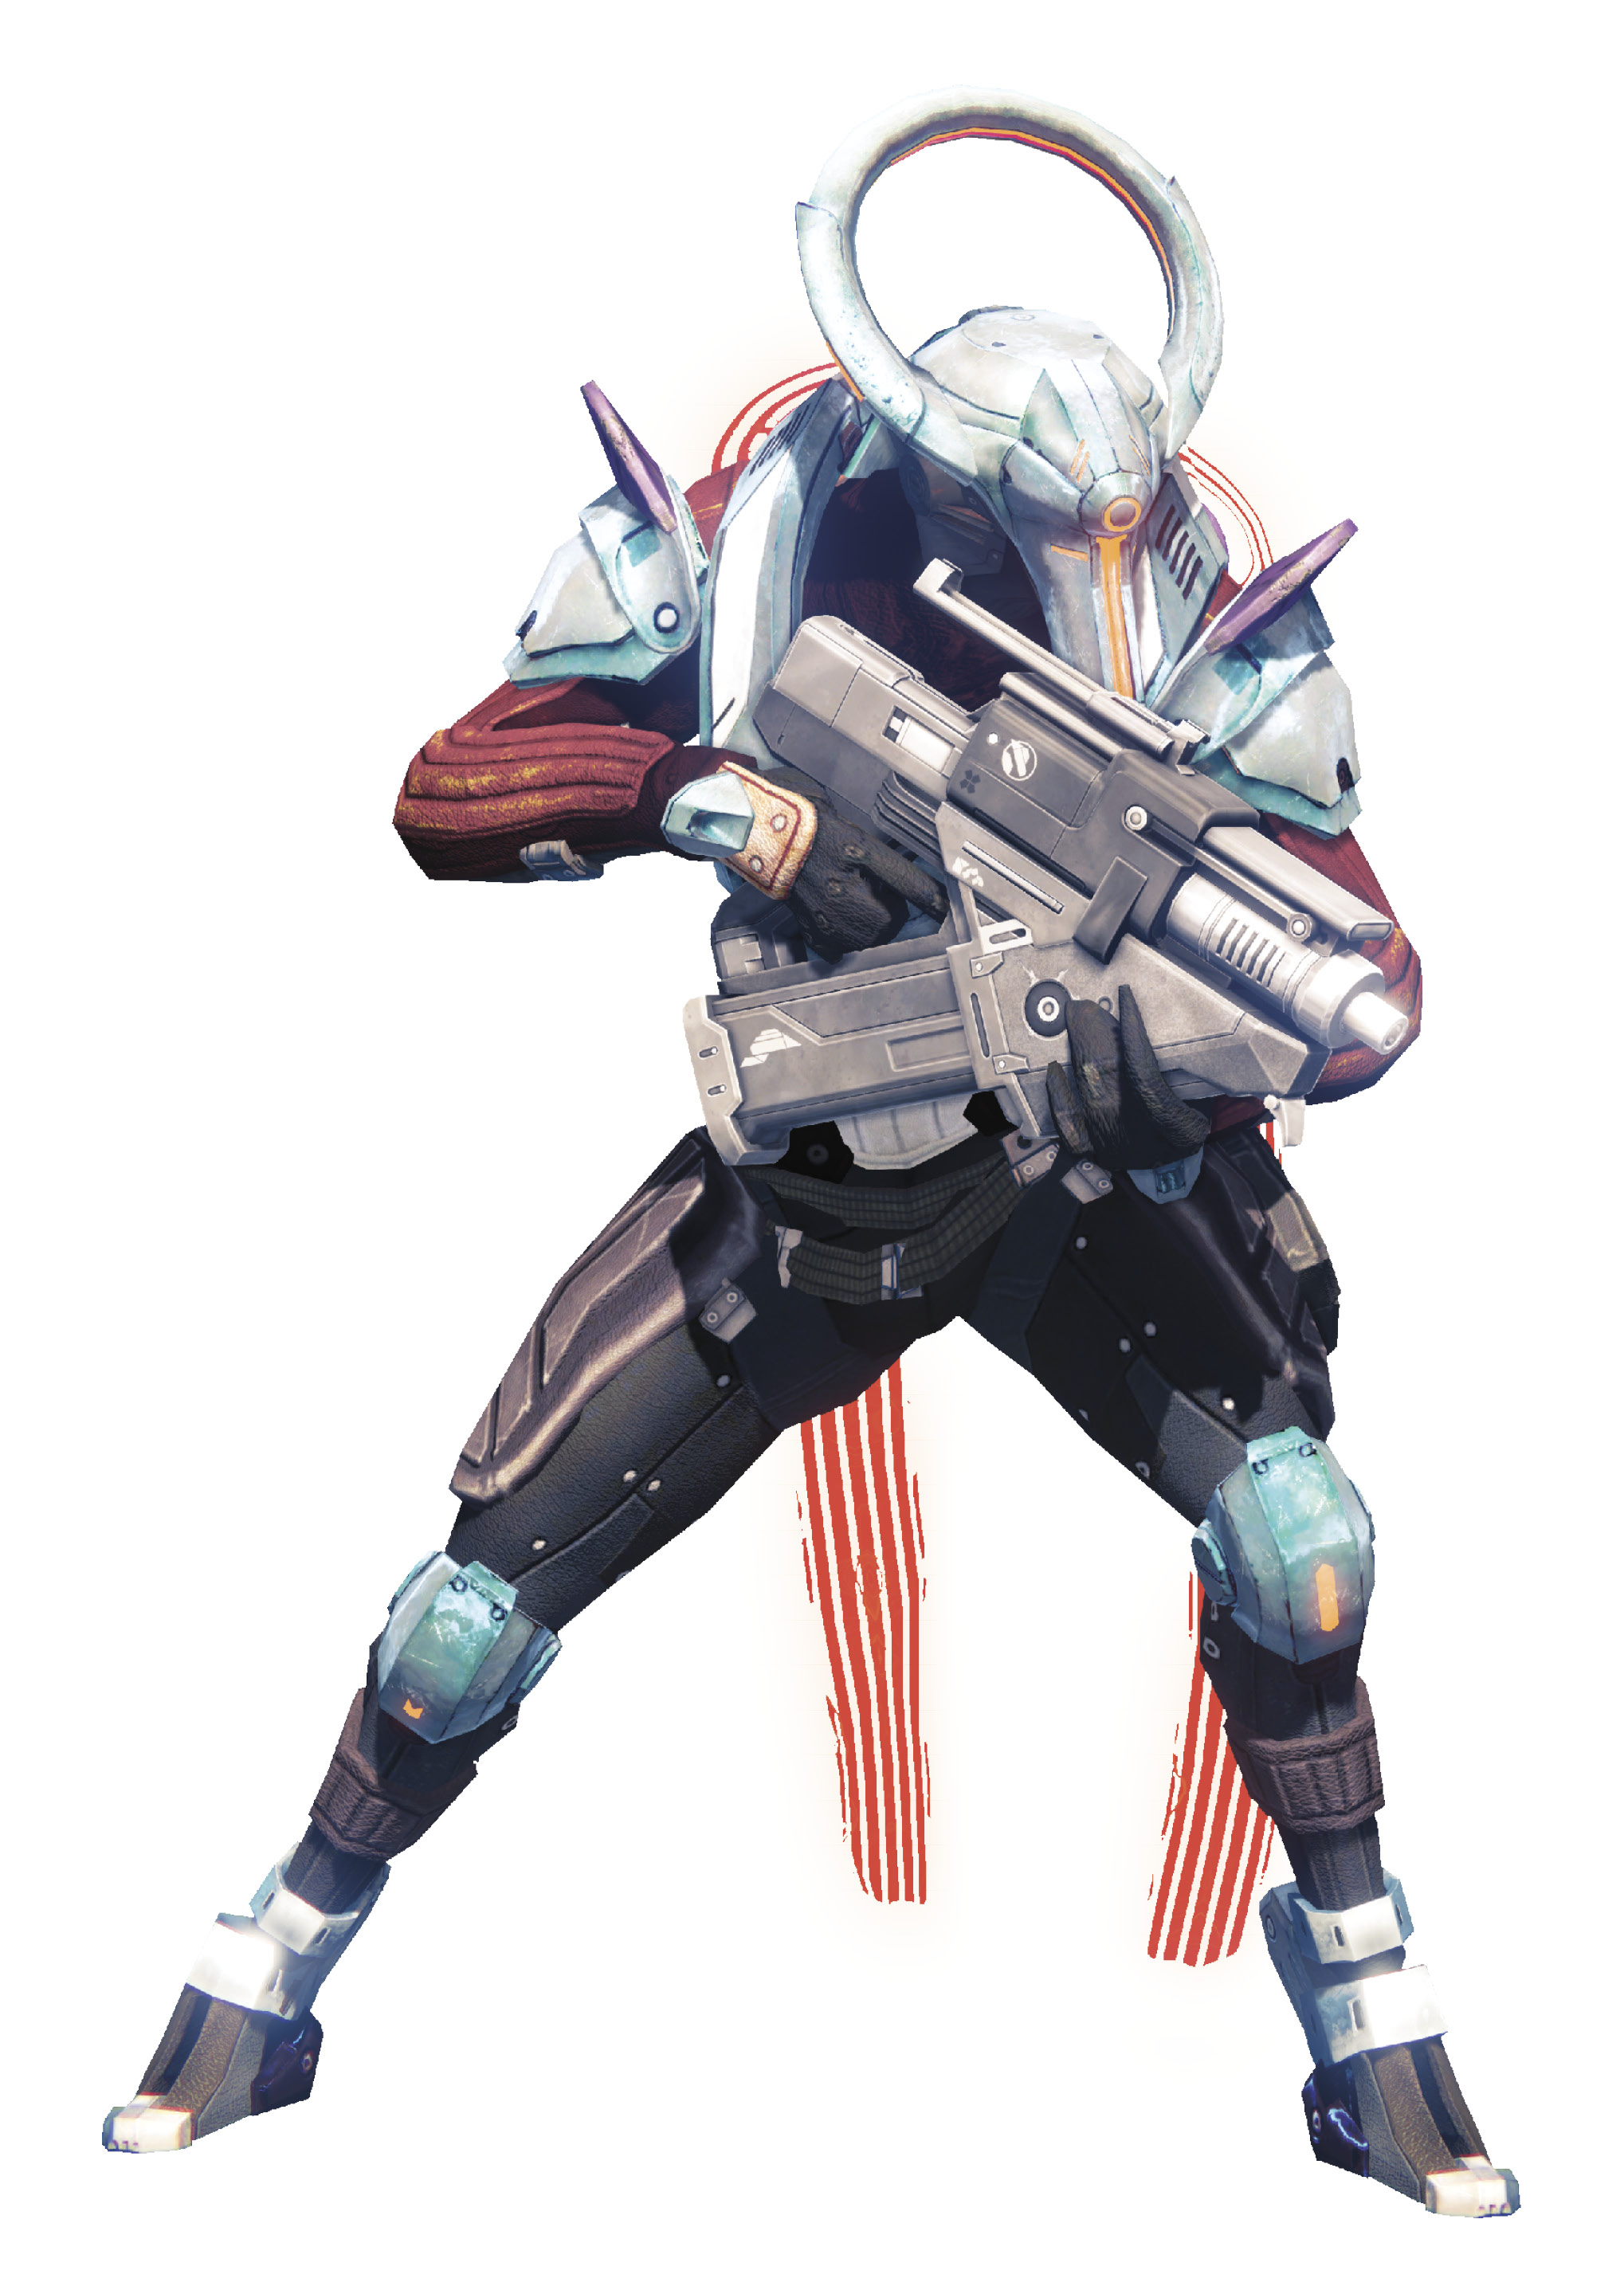 I want a Cabal expansion just for the sweet space turtle raid gear.